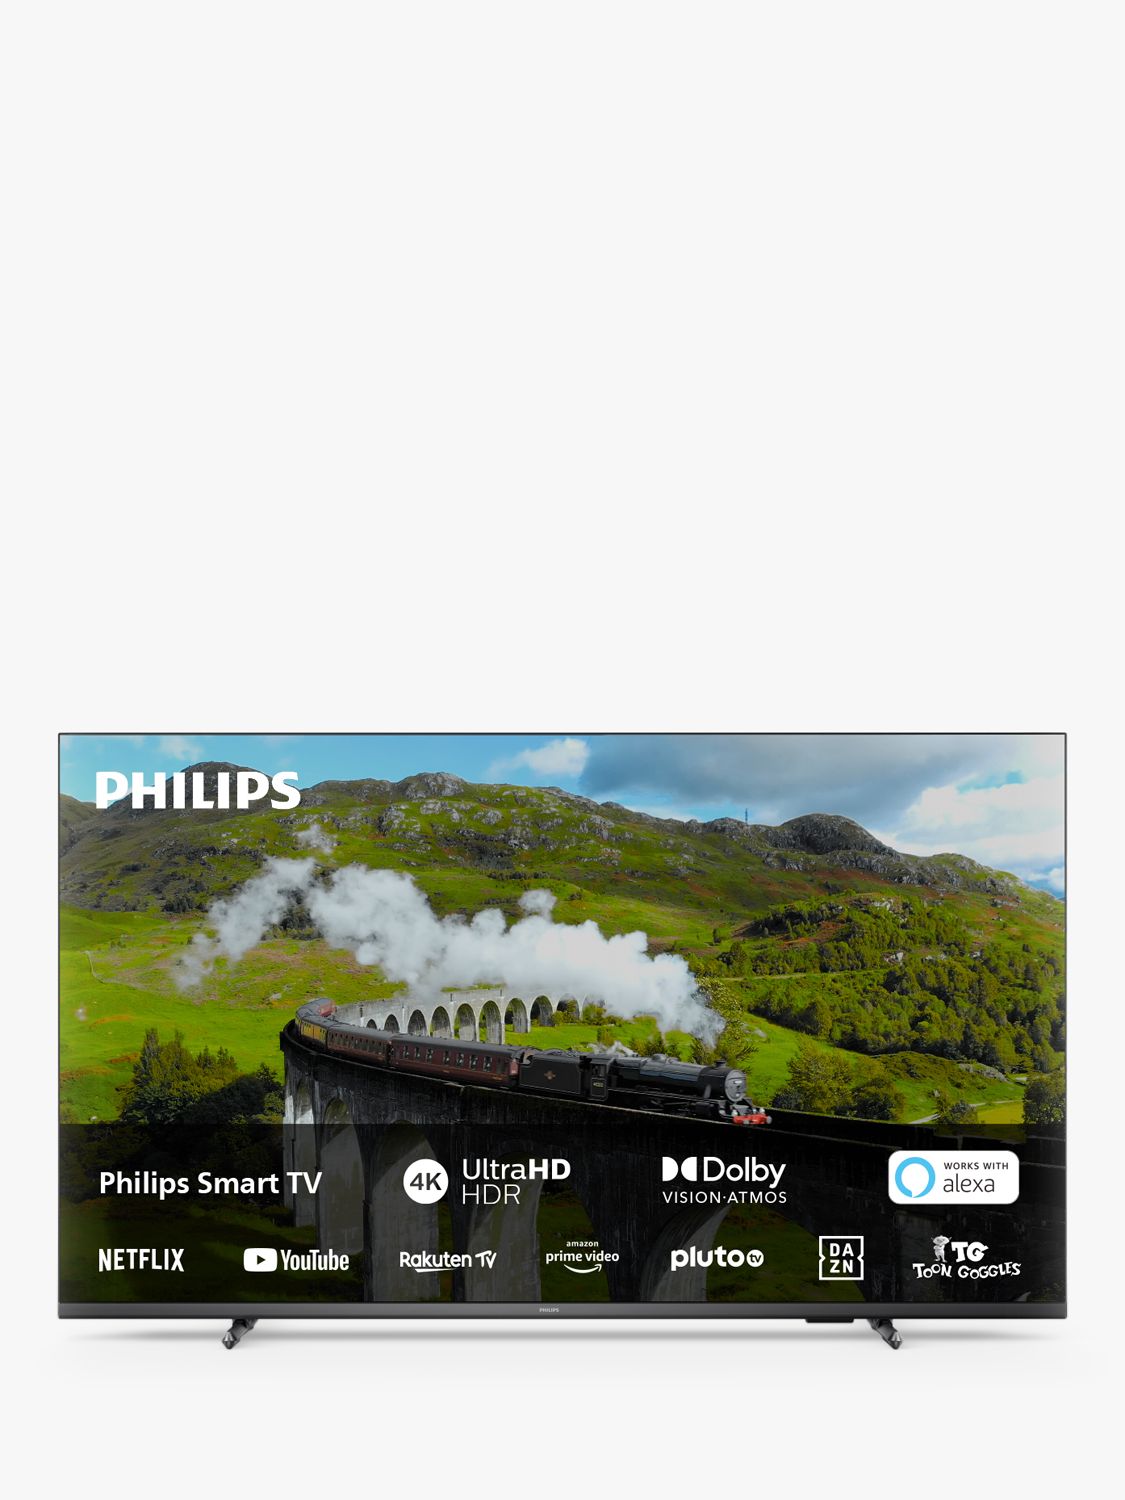 Philips 75PUS7608 (2023) LED HDR 4K Ultra HD Smart TV, 75 inch with Freeview Play & Dolby Atmos, Anthracite Grey